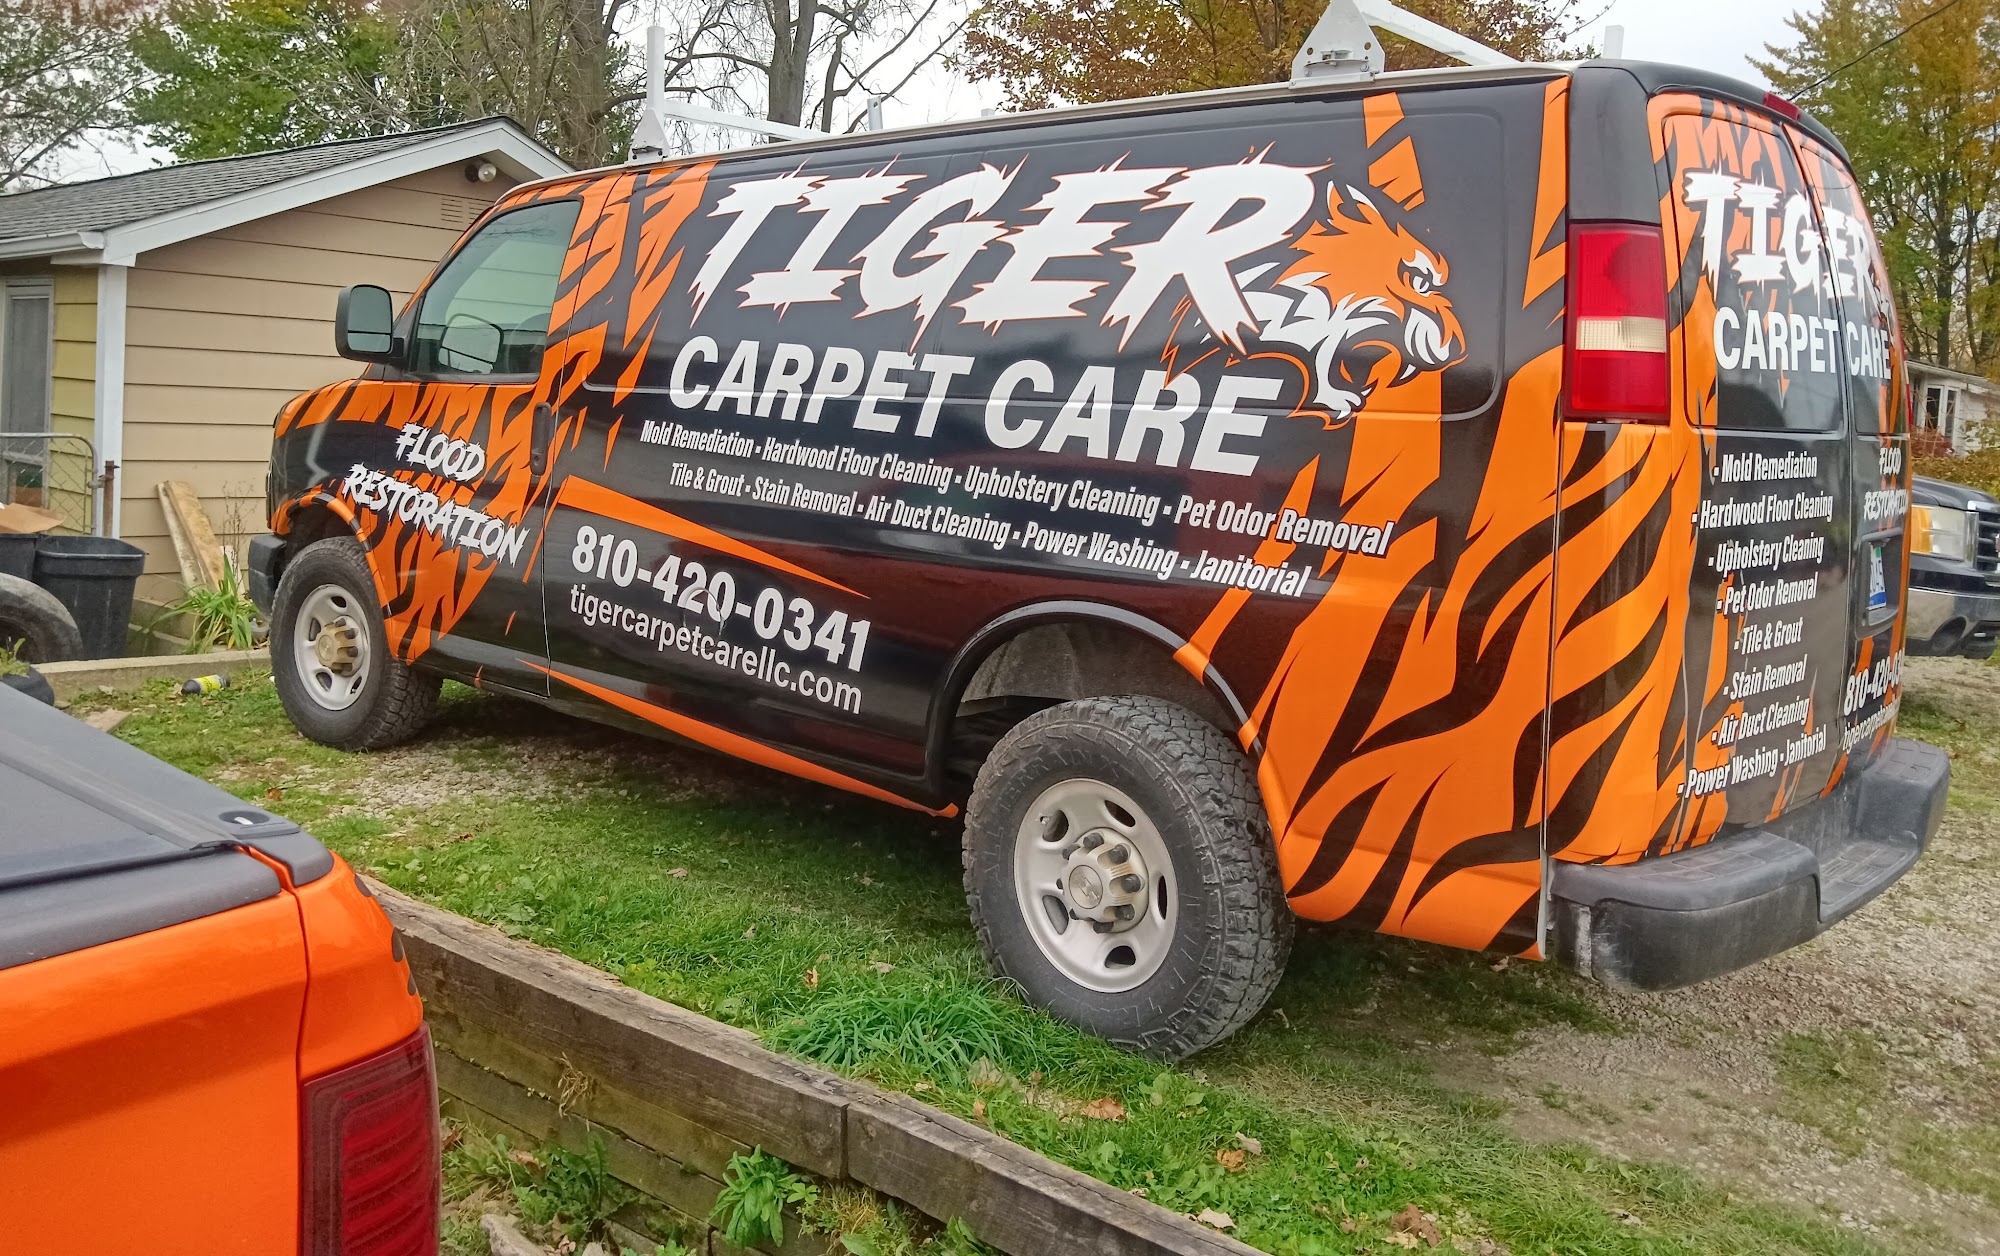 Tiger Carpet Care / Flood and mold remediation 5495 Orchard Dr, East China Michigan 48054